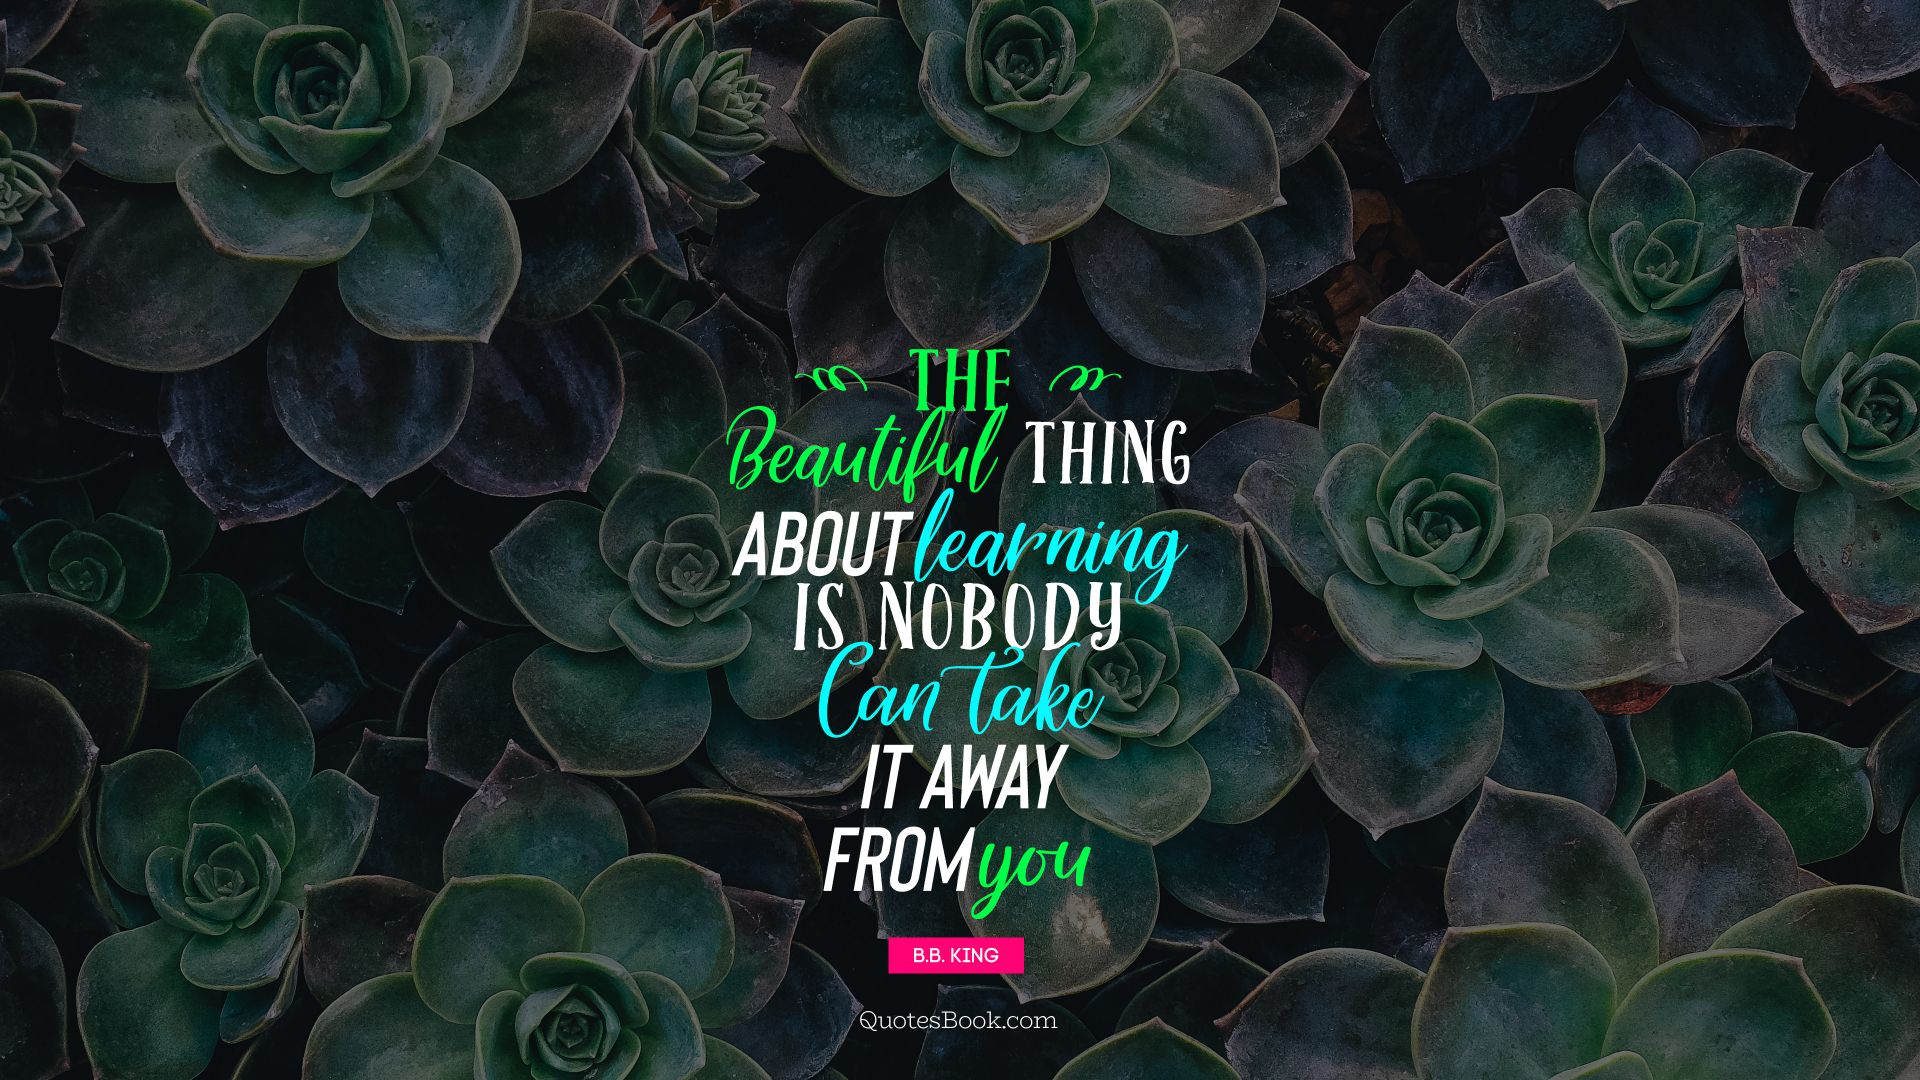 The beautiful thing about learning is nobody can take it away from you. - Quote by B.B. King 